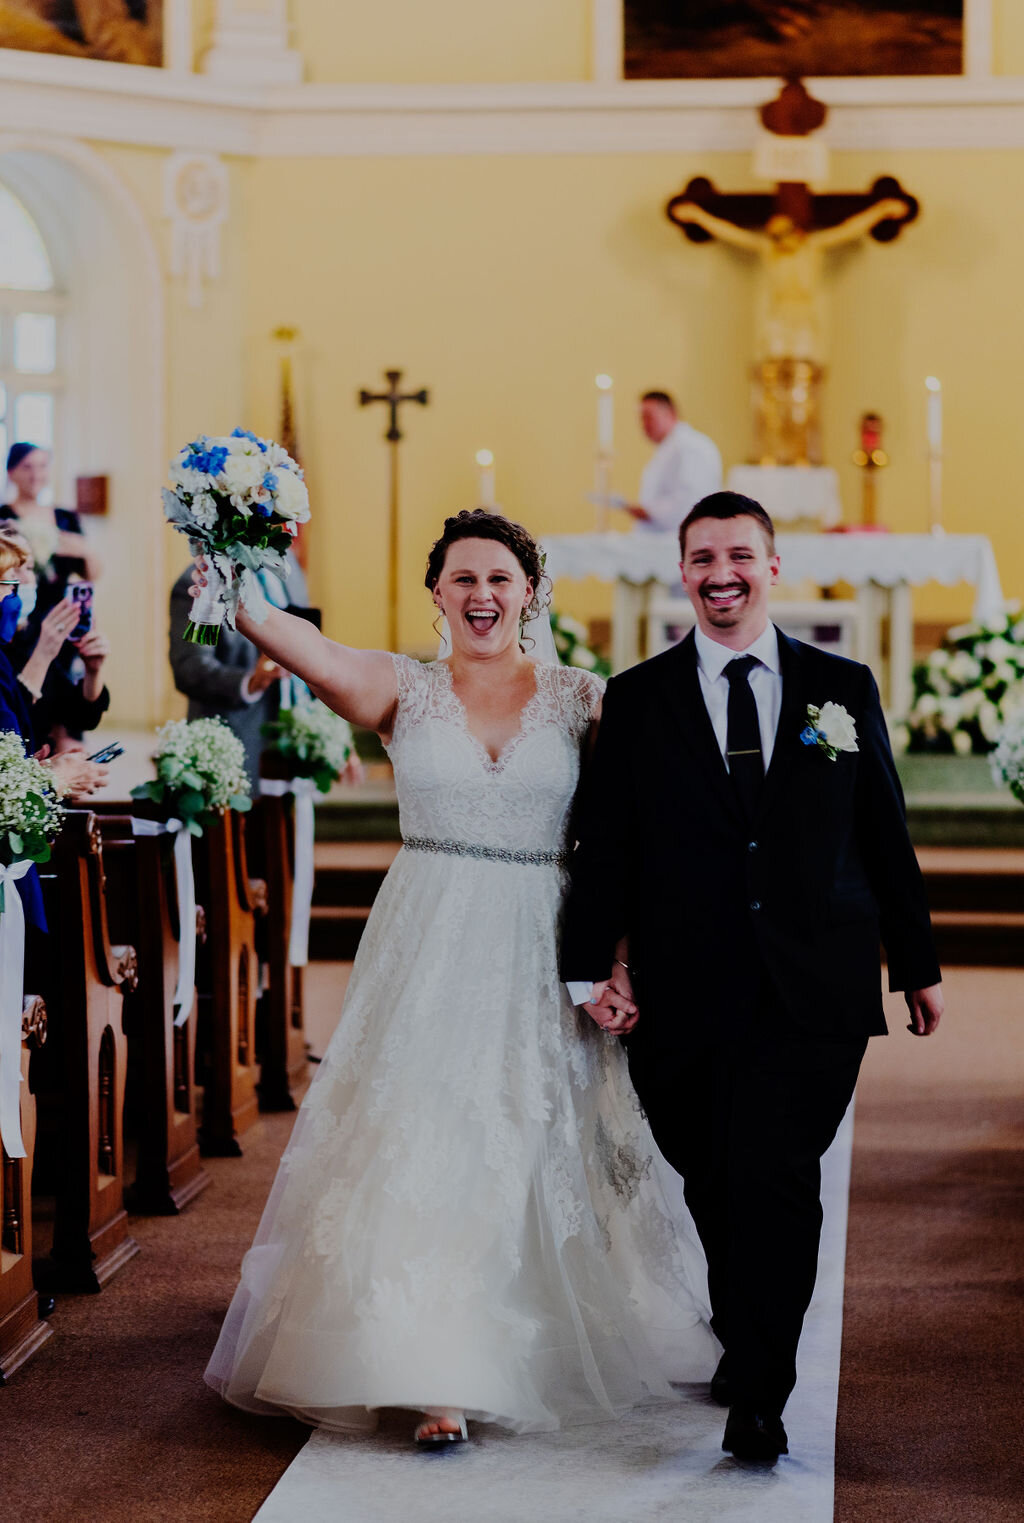 Nativity of Our Lord Chicago Front Porch Wedding captured by Mackenzie Maeder Photo + Video featured on CHI thee WED